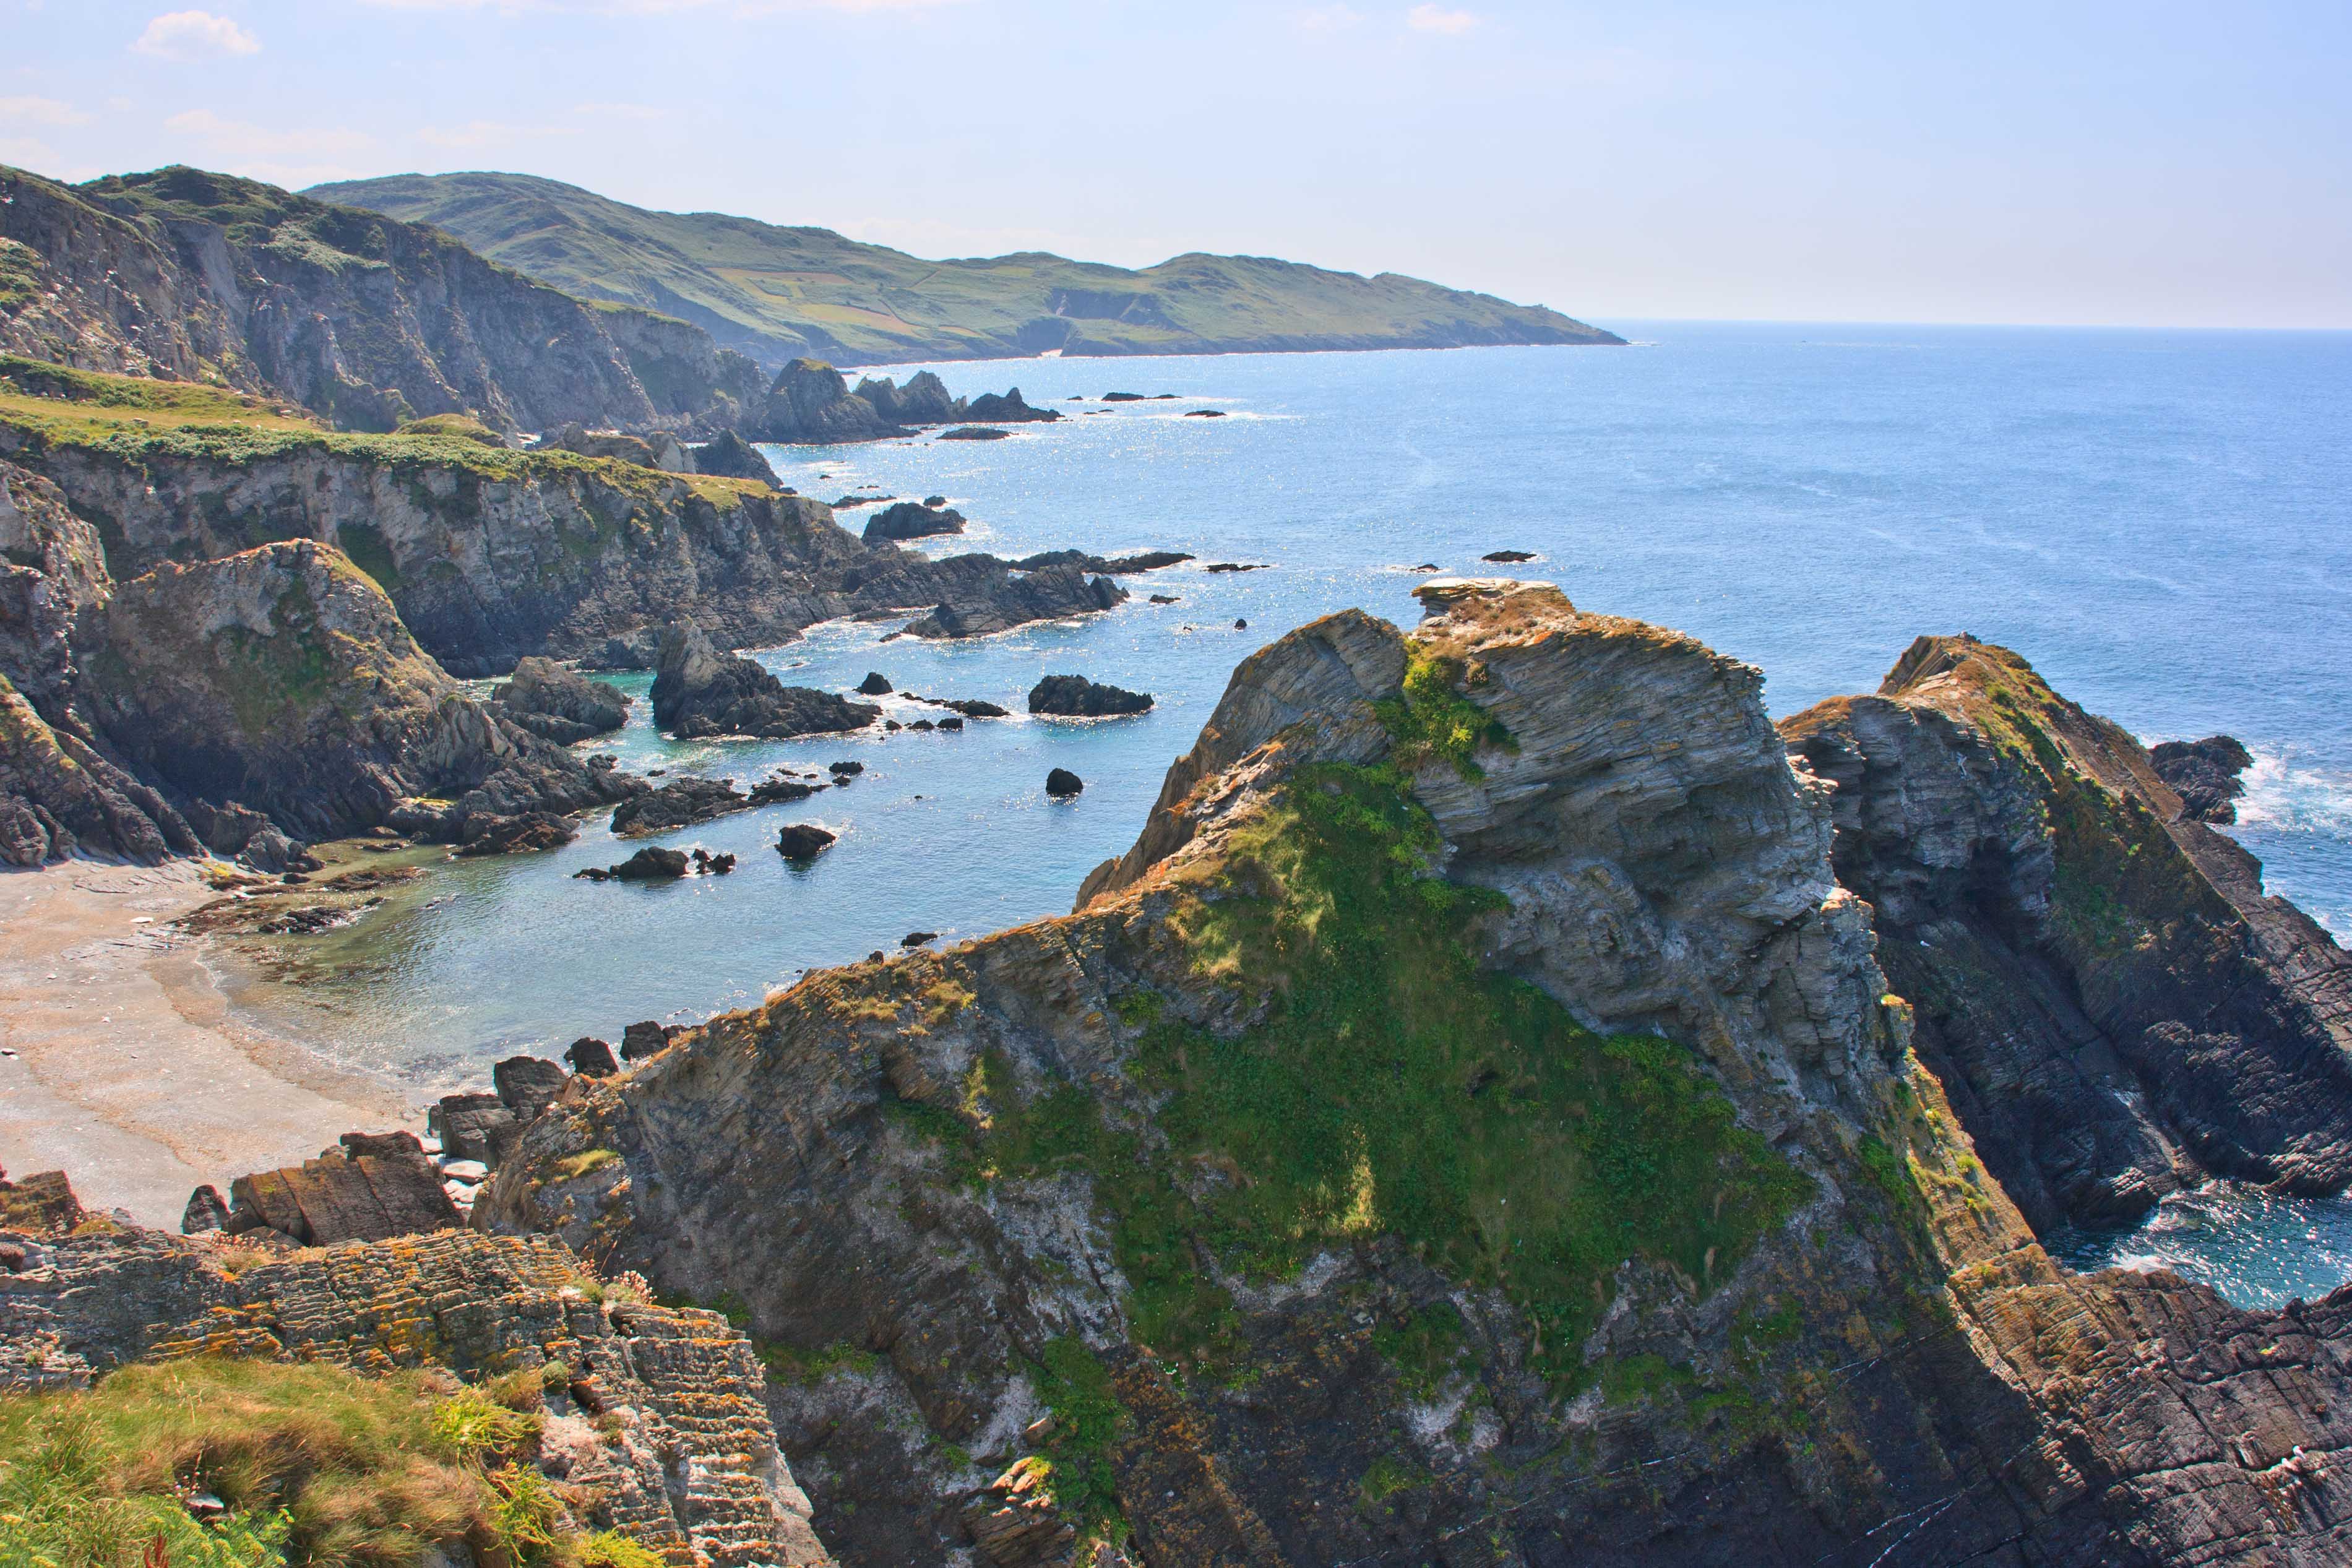 View west from Bull Point towards Morte Point (between Ilfracombe and Woolacombe)